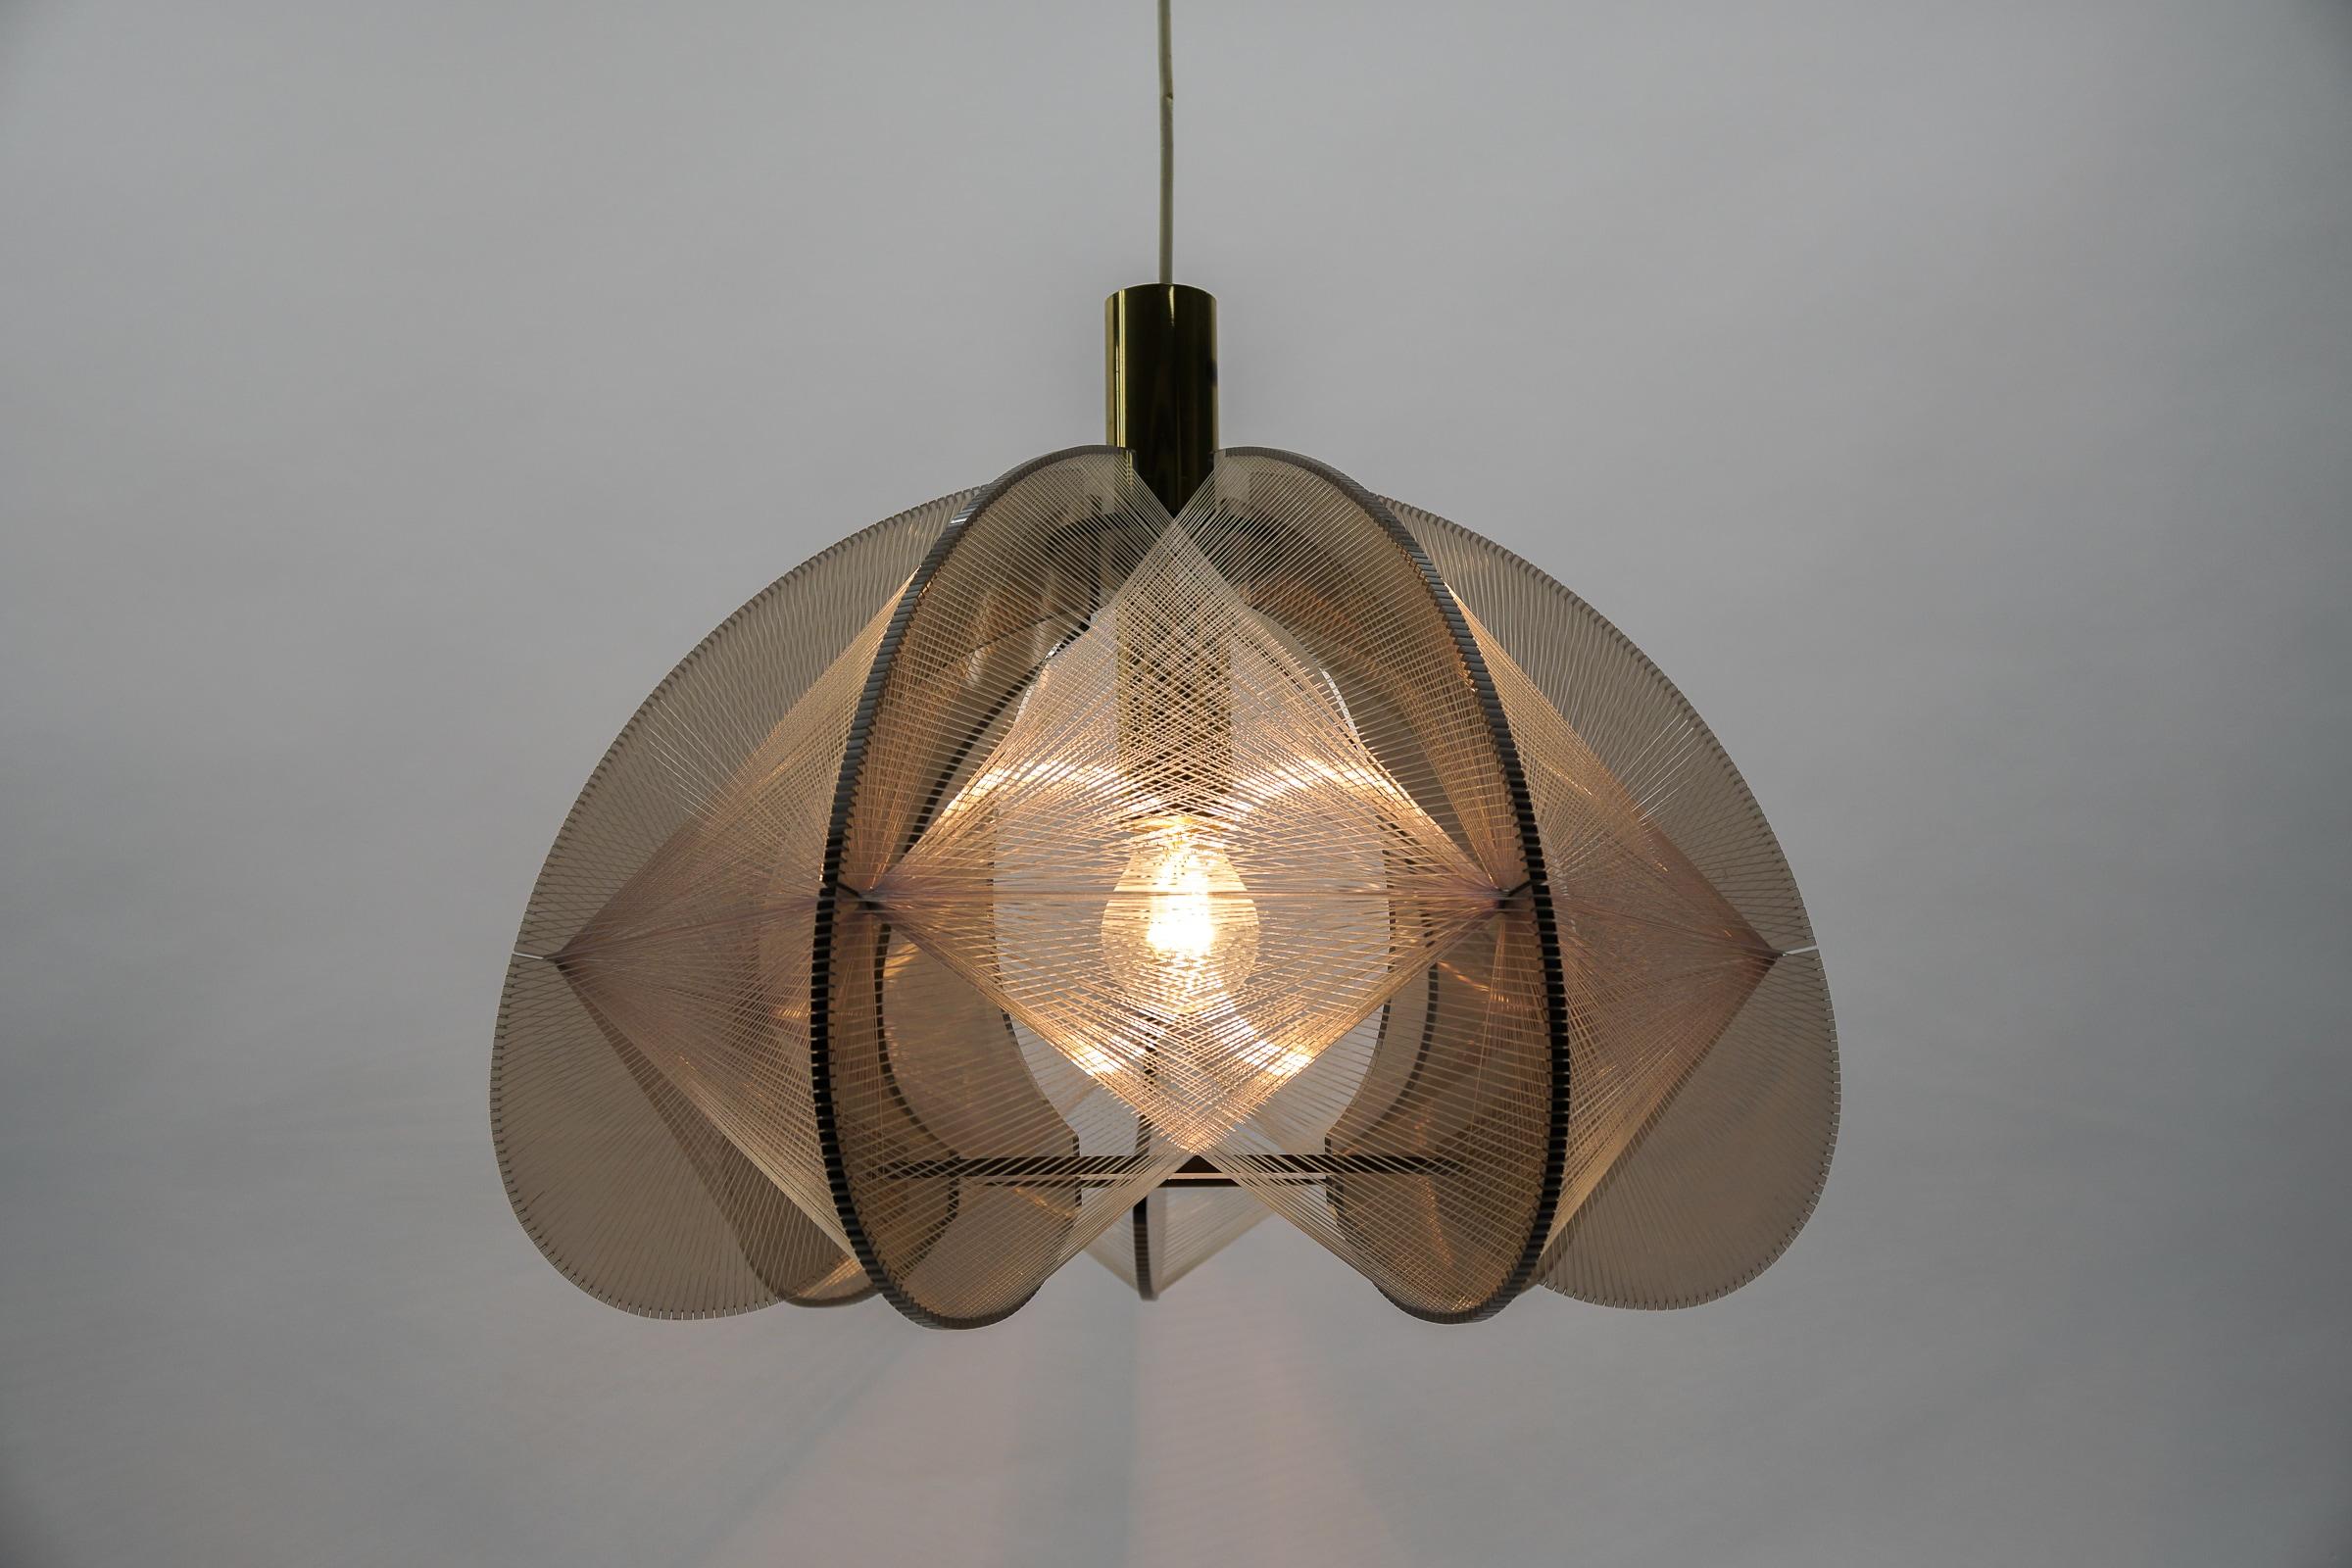 Metal Nylon Thread Pendant Lamp by Paul Secon for Sompex, Germany 1960s